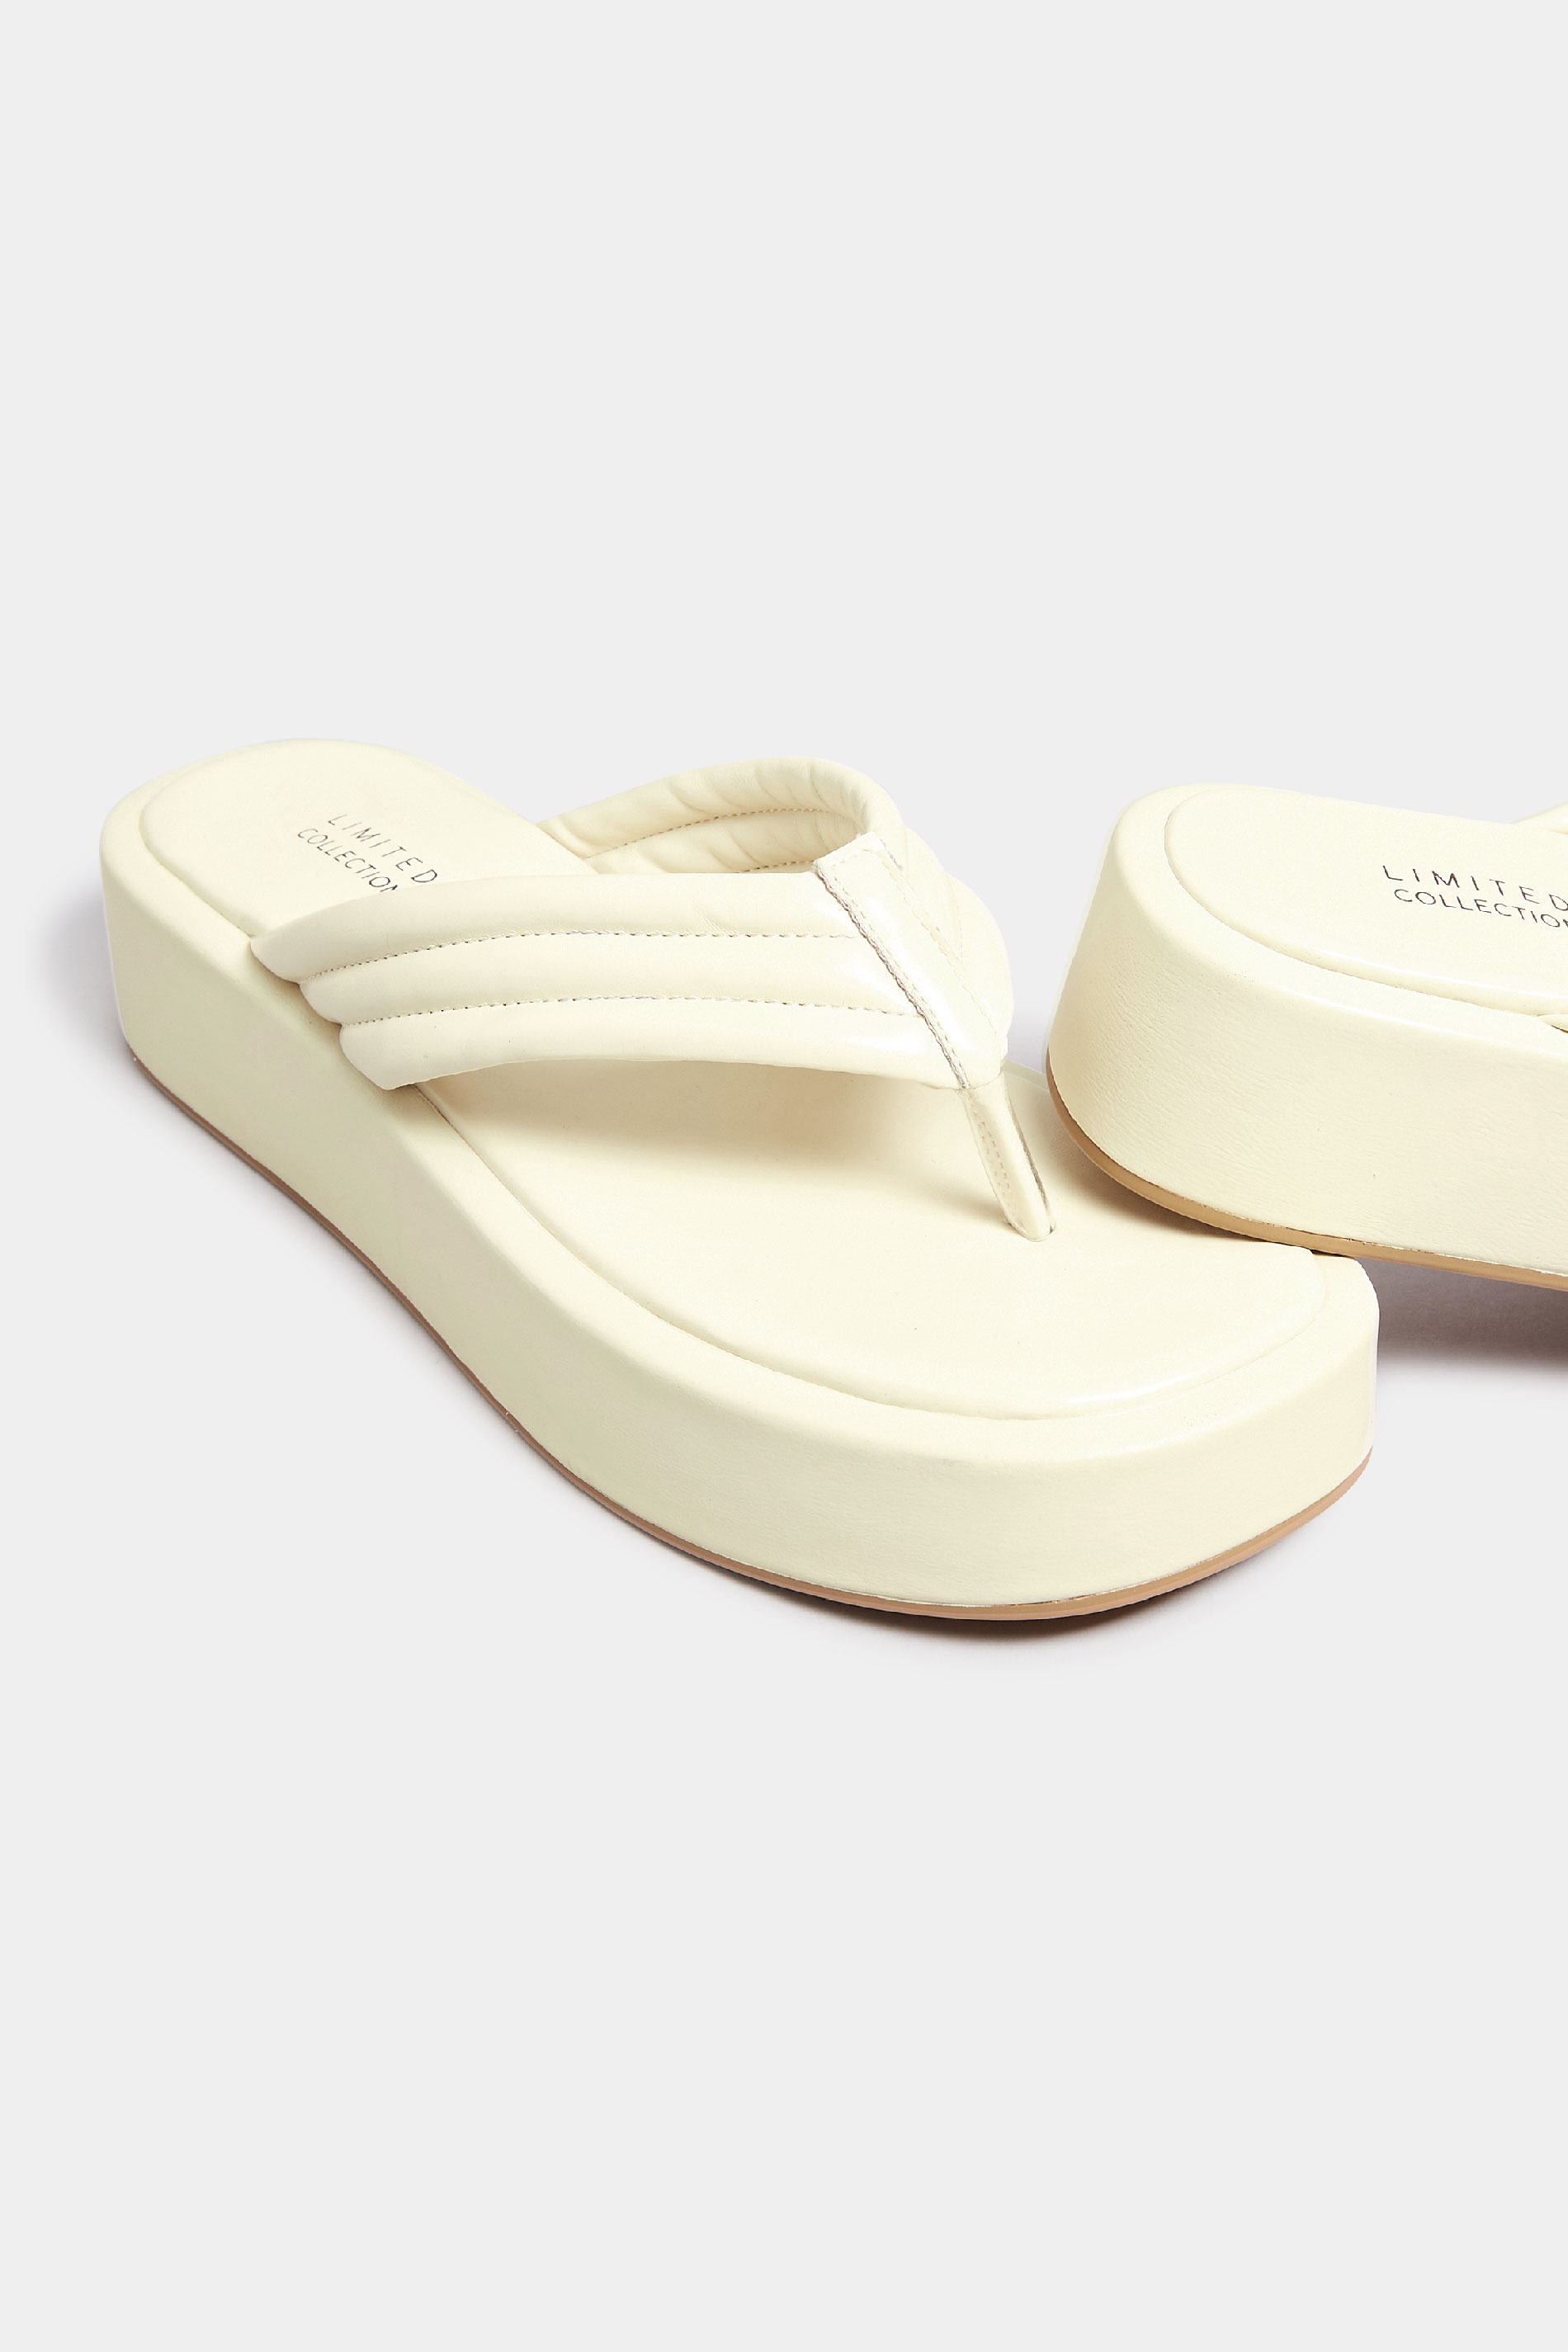 LIMITED COLLECTION White Flatform Flip Flops In Wide E Fit | Yours Clothing